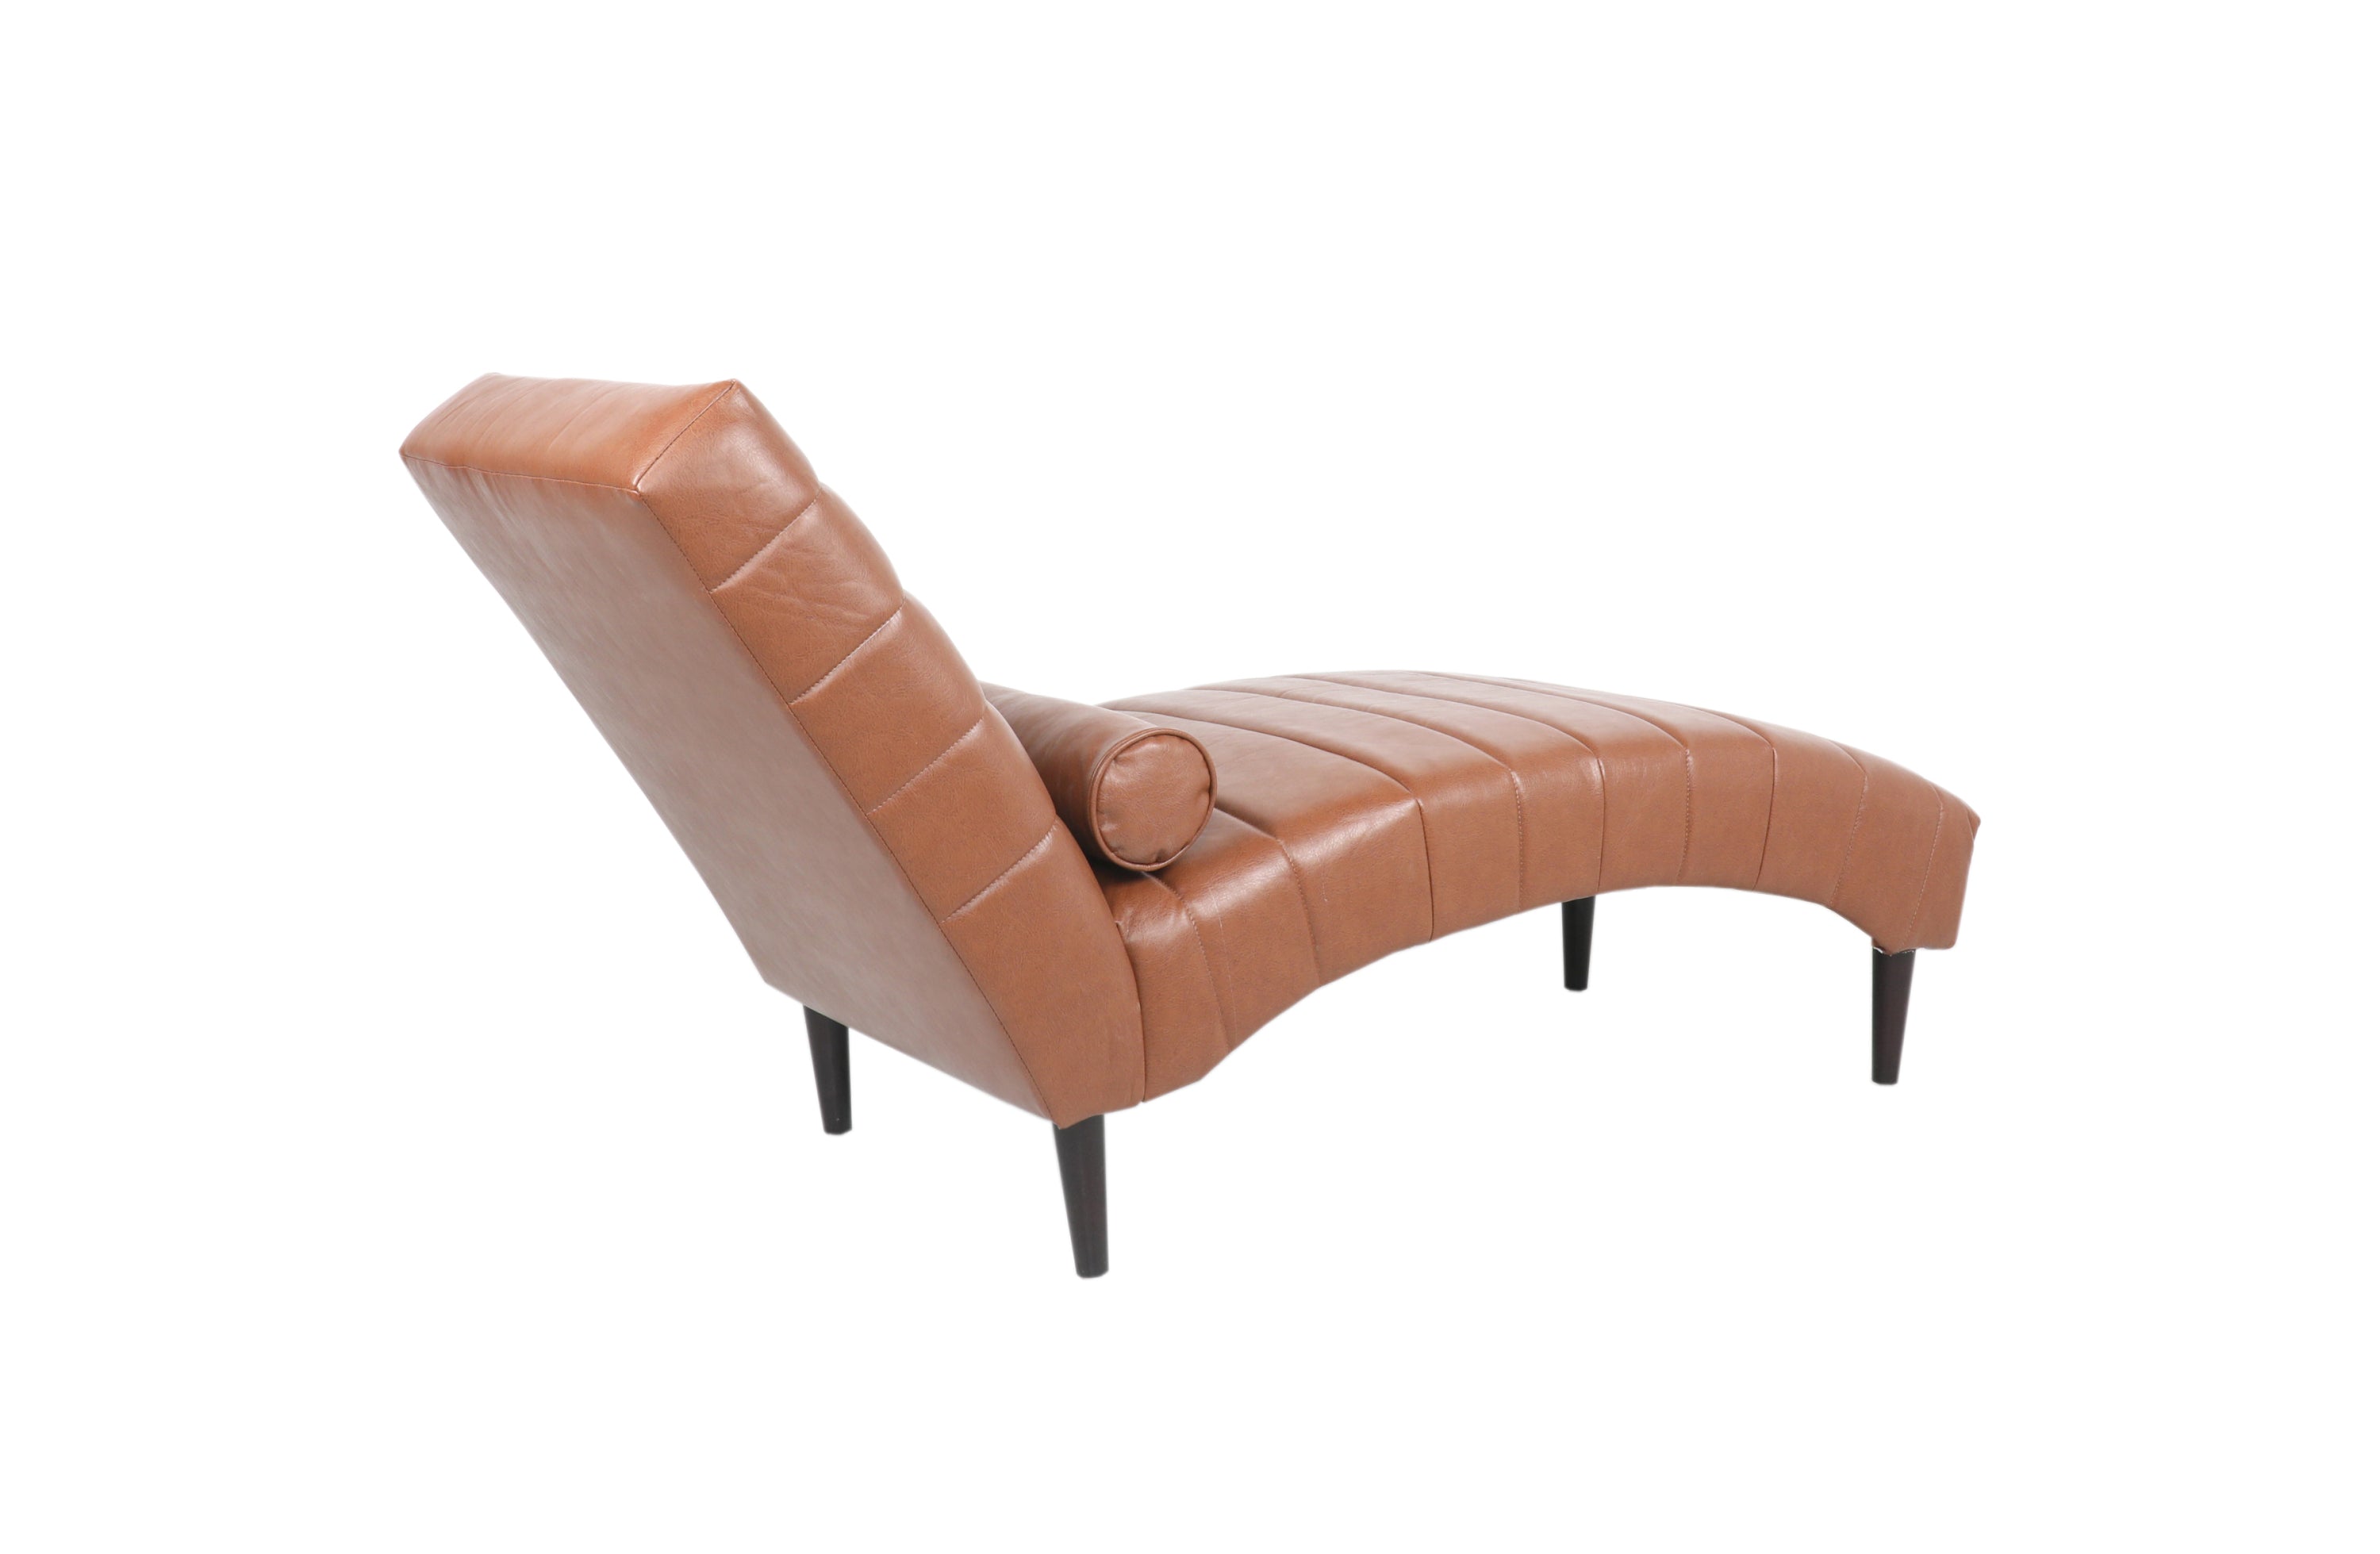 Modern Chaise Lounge for Bedroom,Office, Living Room with Luxury PU